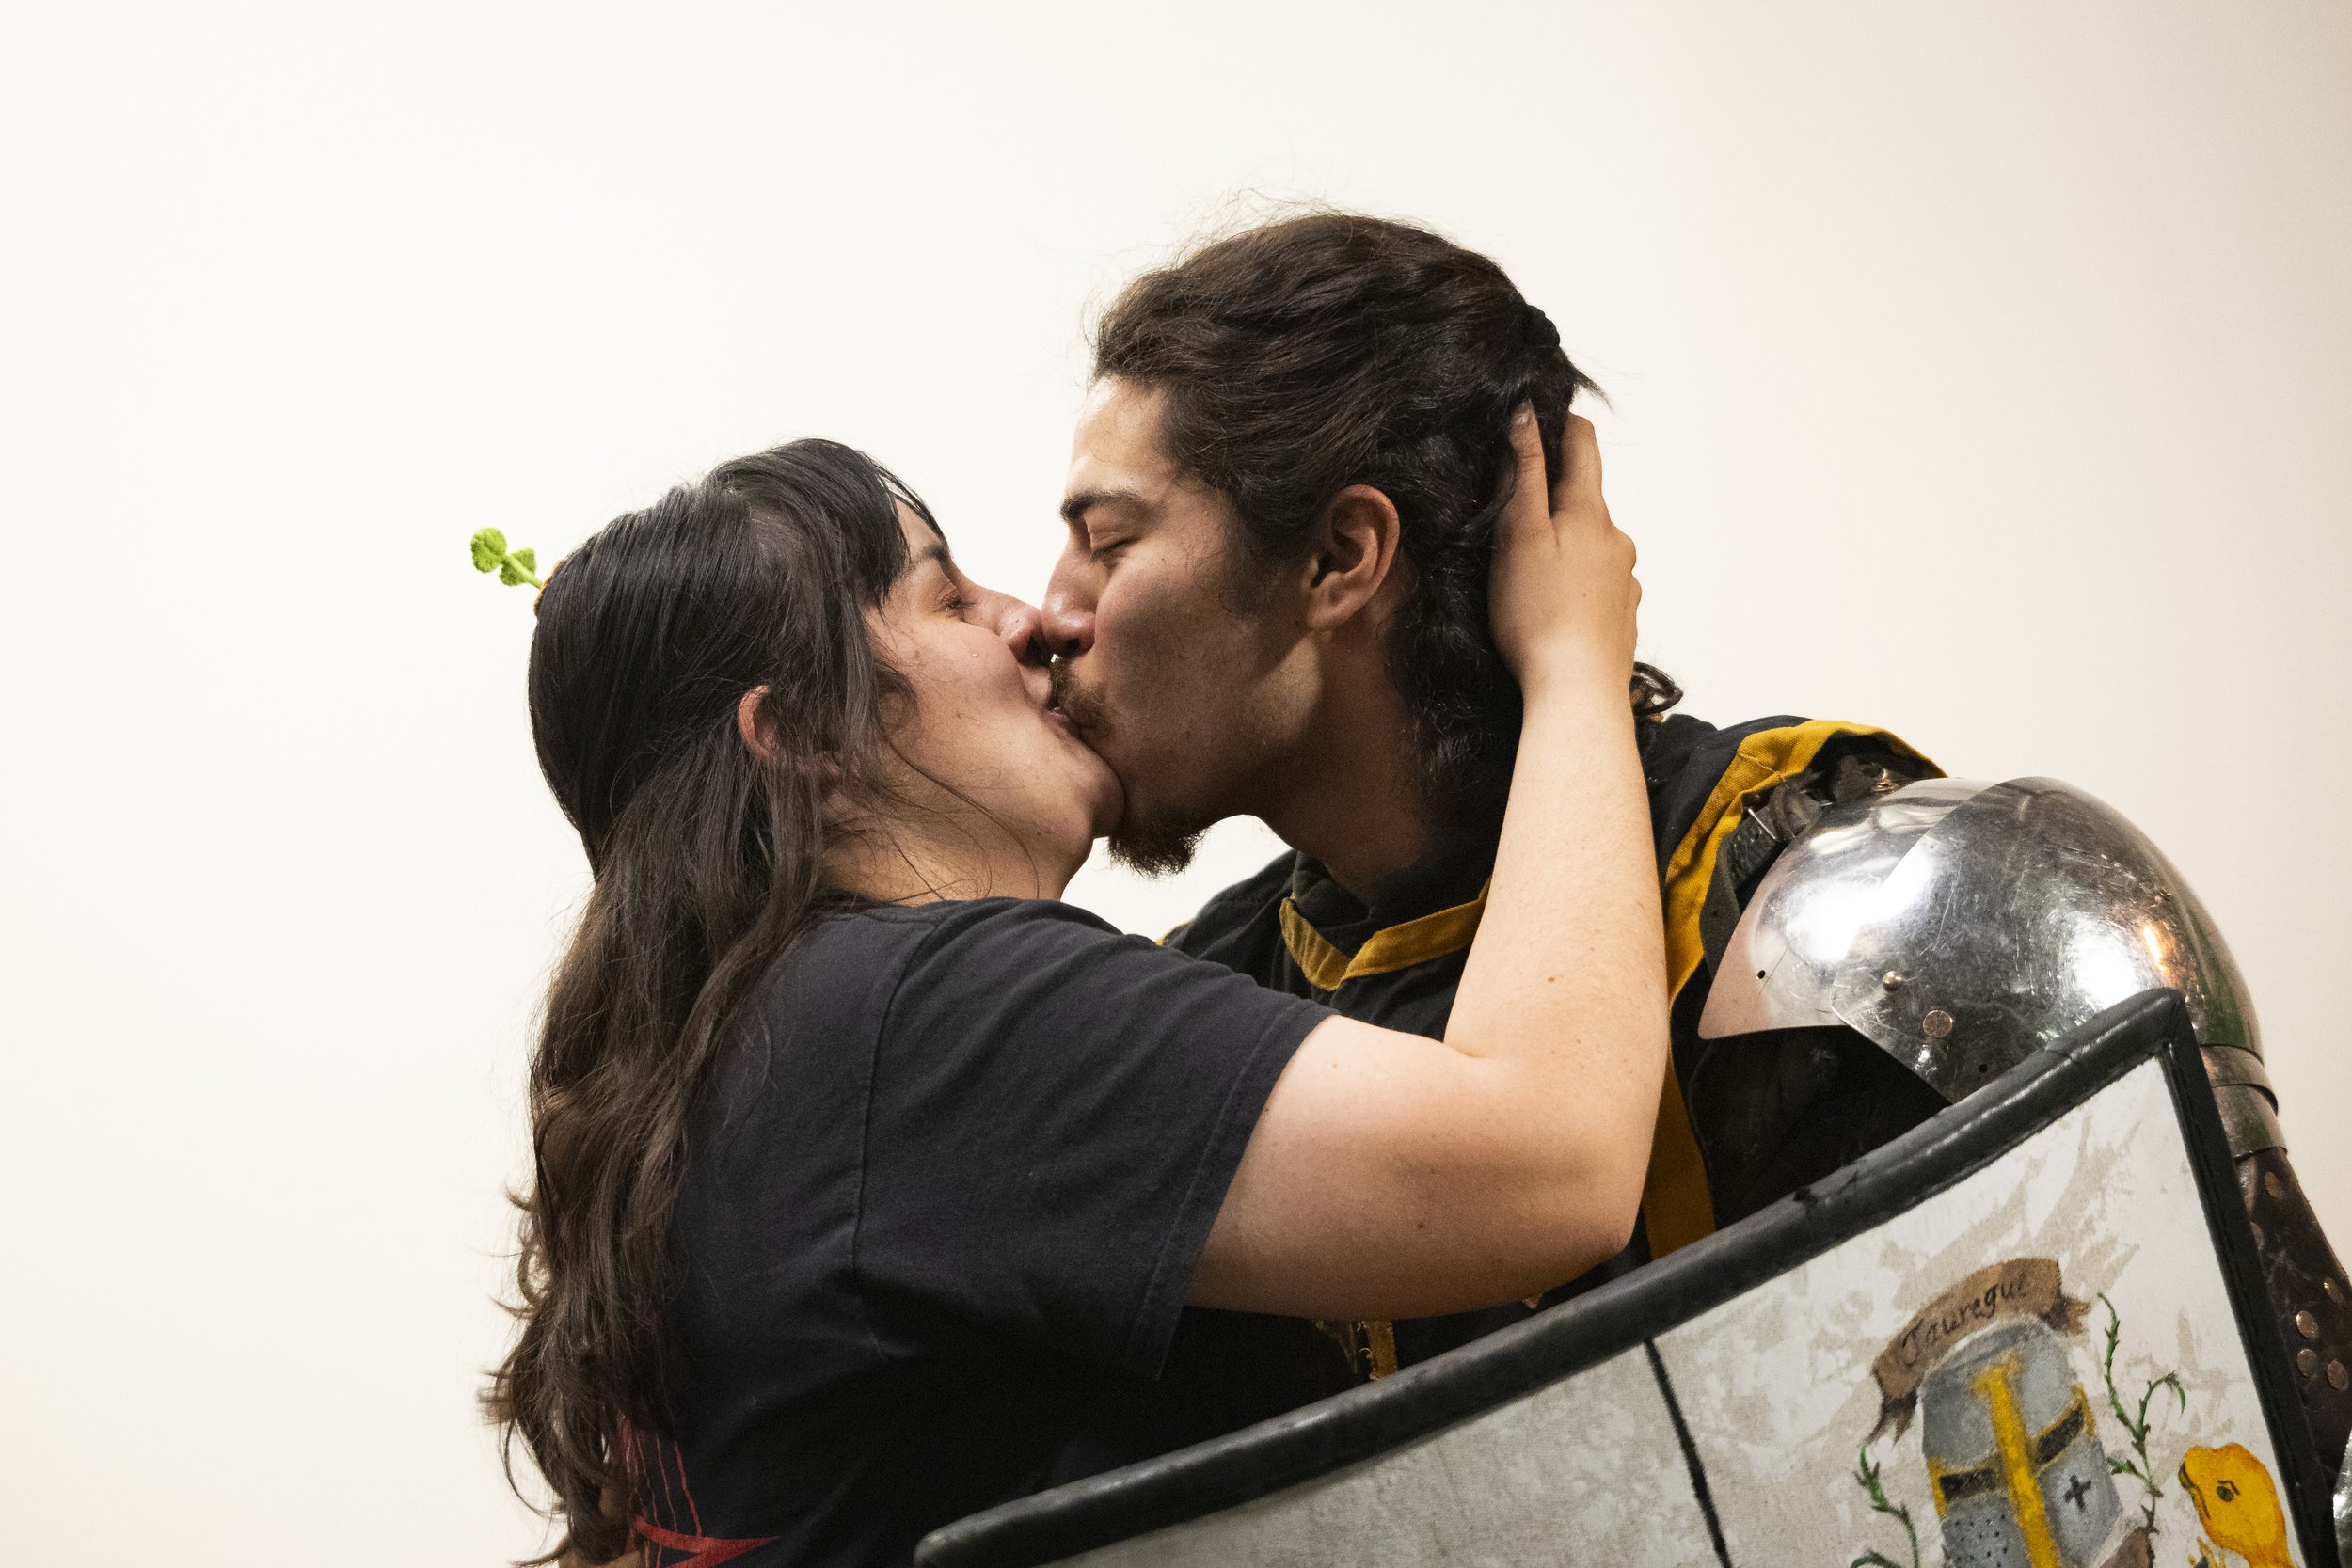  Fry Bastista and Angel Jauregui kiss after he faked an injury and proposed when she went to check on him during Golden Ring II in Burbank, Calif., on Saturday, Dec. 16, 2023. (Caylo Seals | The Corsair) 